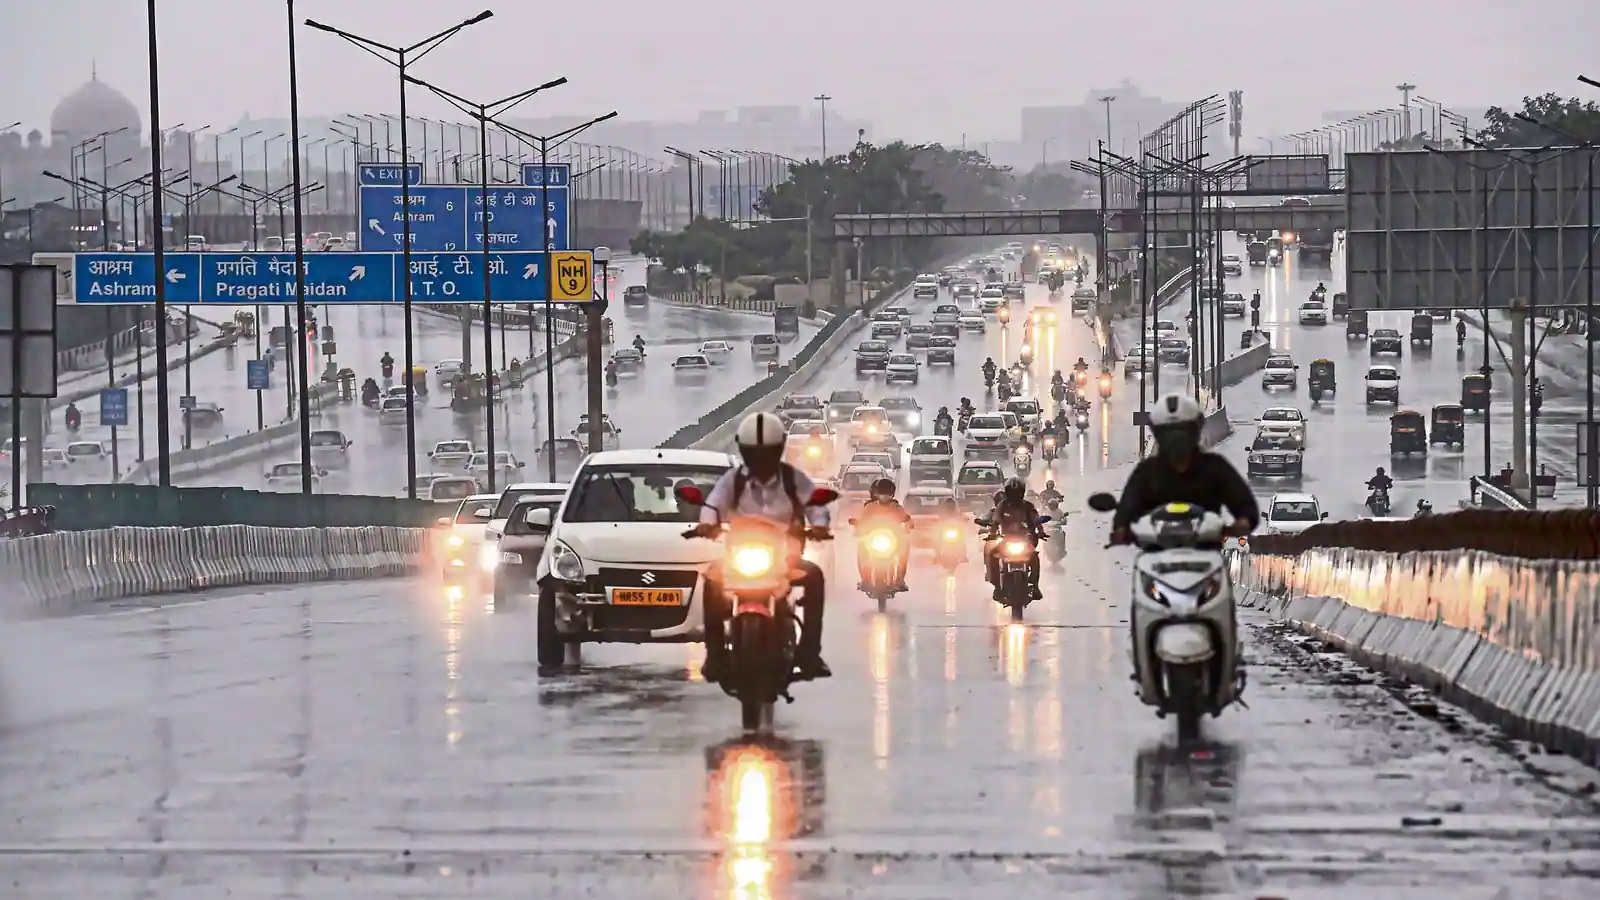 IMD Rainfall Alert: Heavy rains are going to occur in these states during the next five days, Meteorological Department’s warning issued